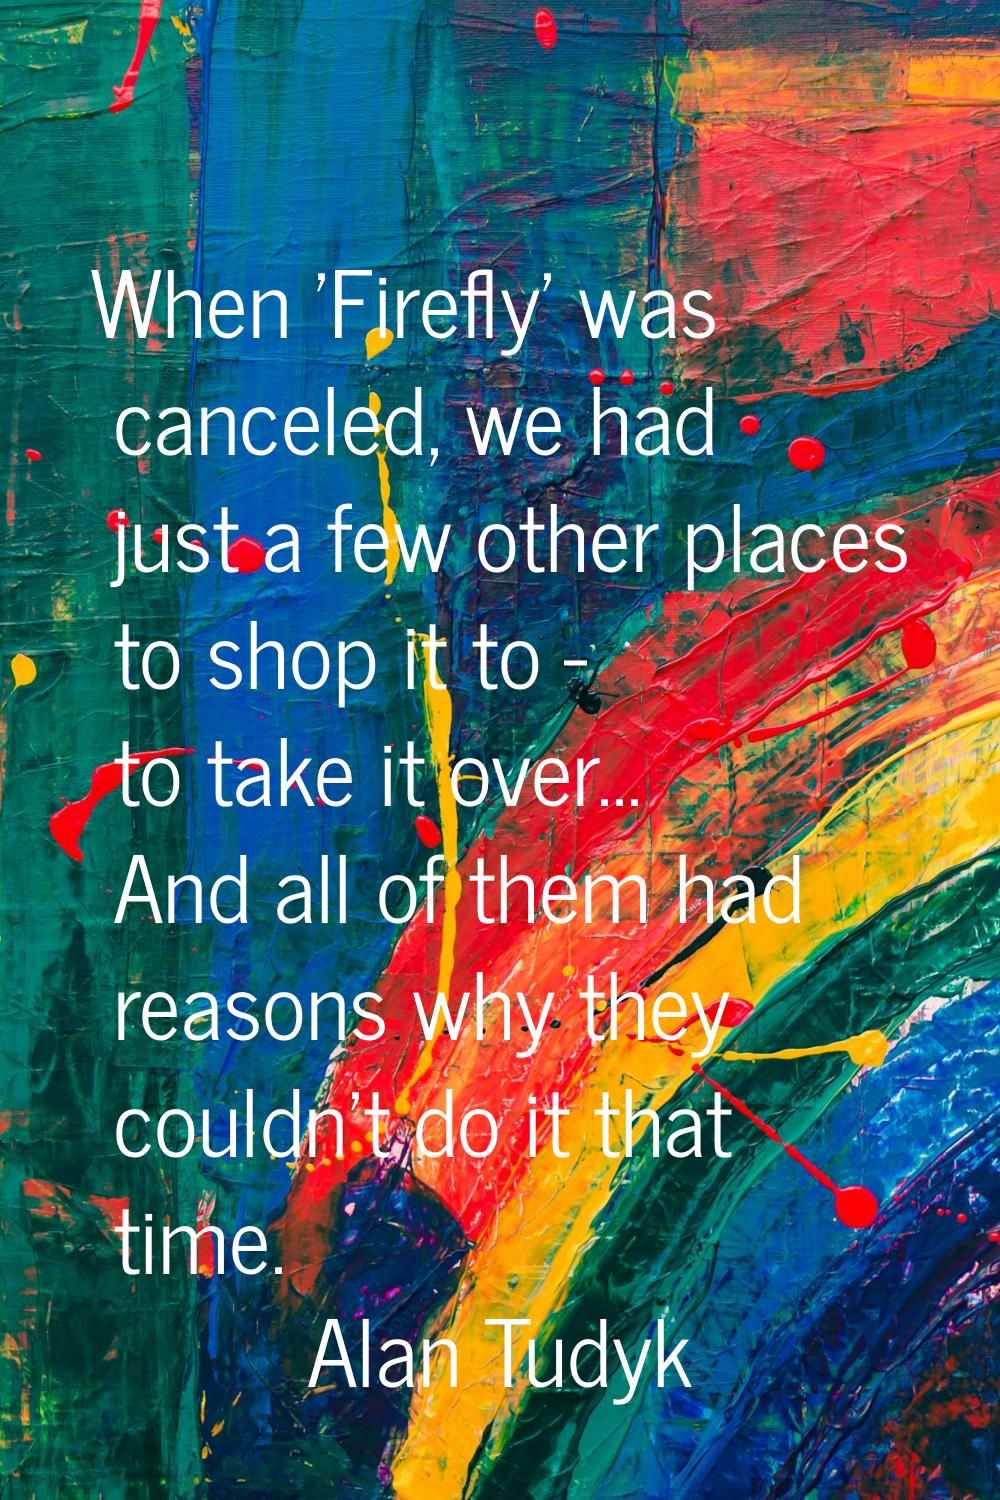 When 'Firefly' was canceled, we had just a few other places to shop it to - to take it over... And 